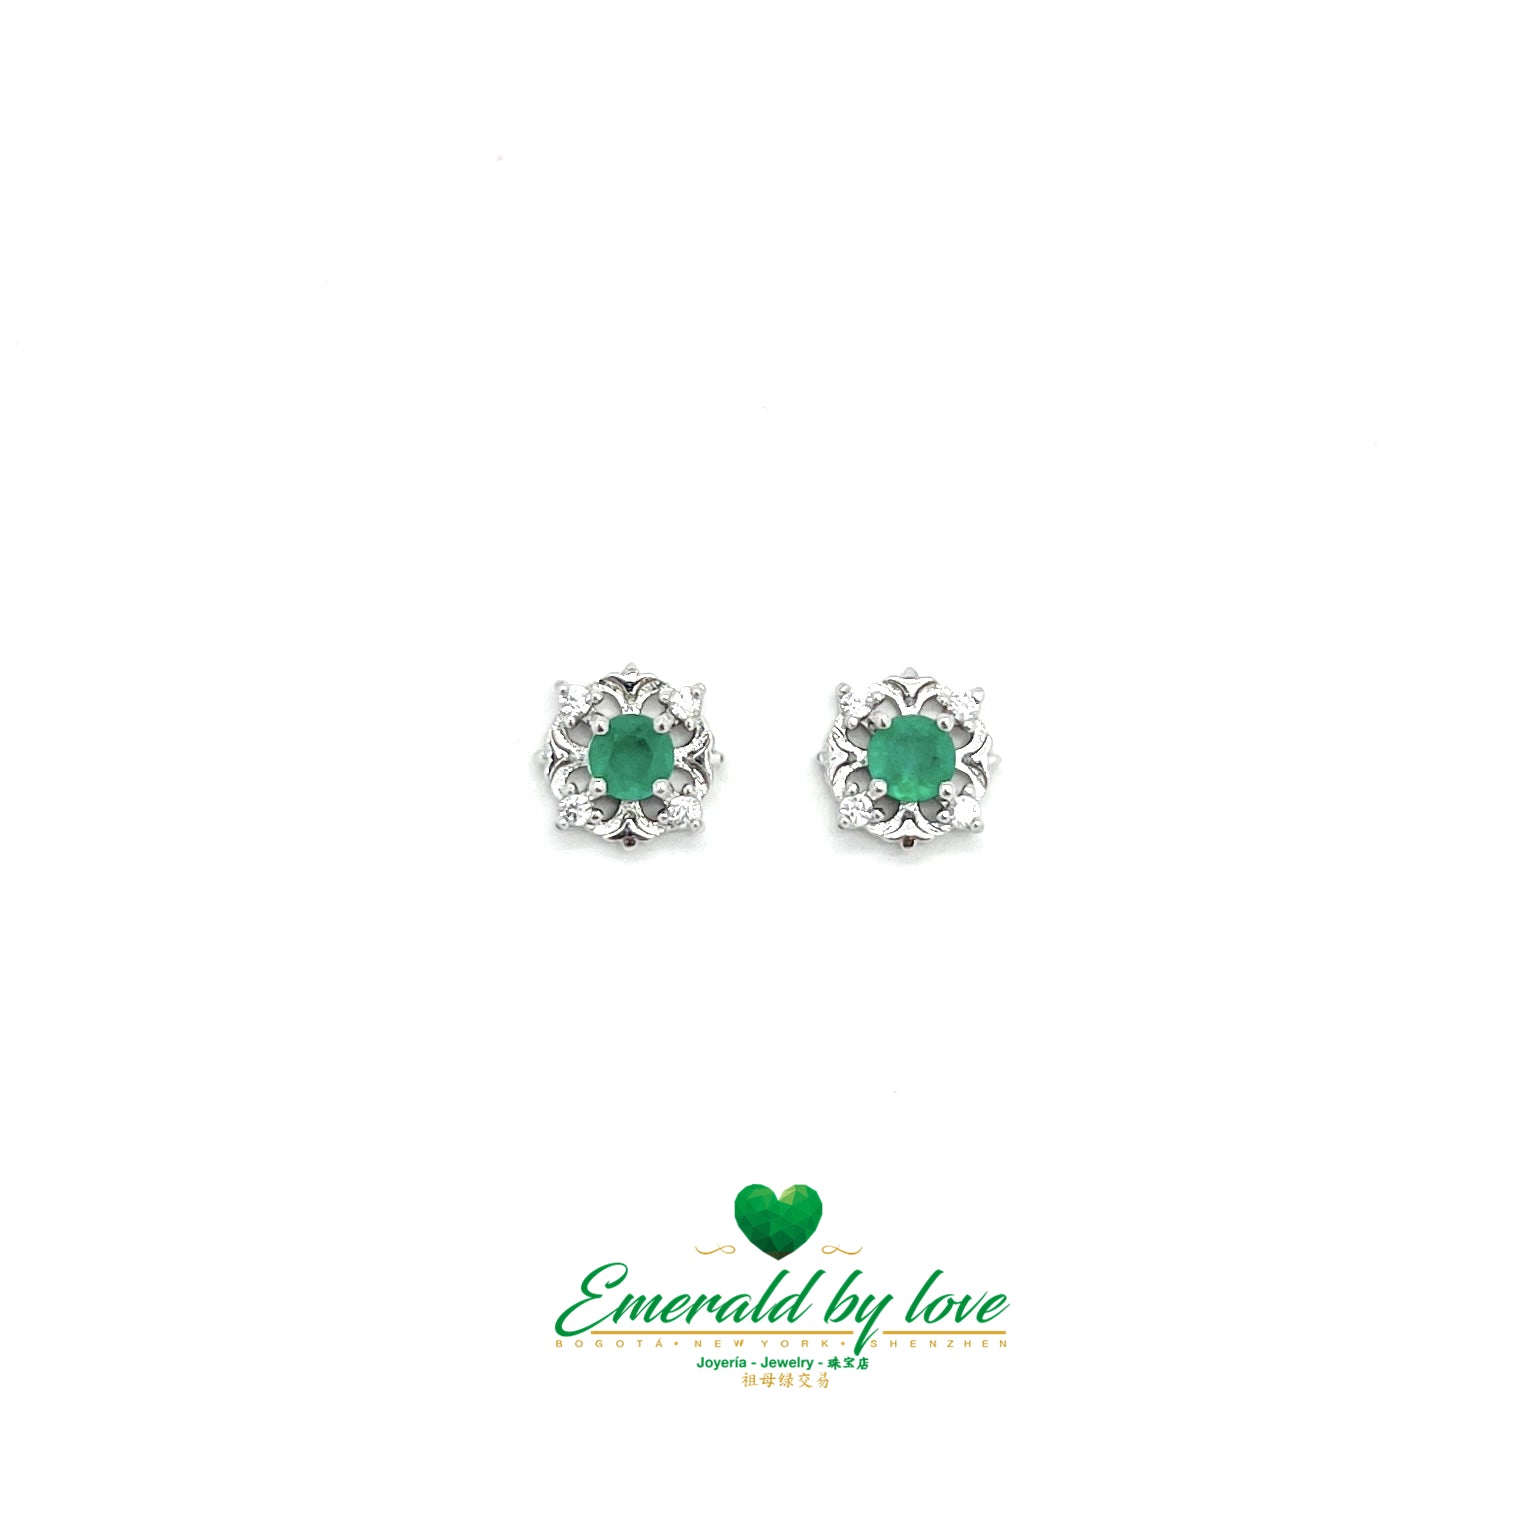 Elegant Silver Earrings with Round Colombian Emeralds in Floral Design